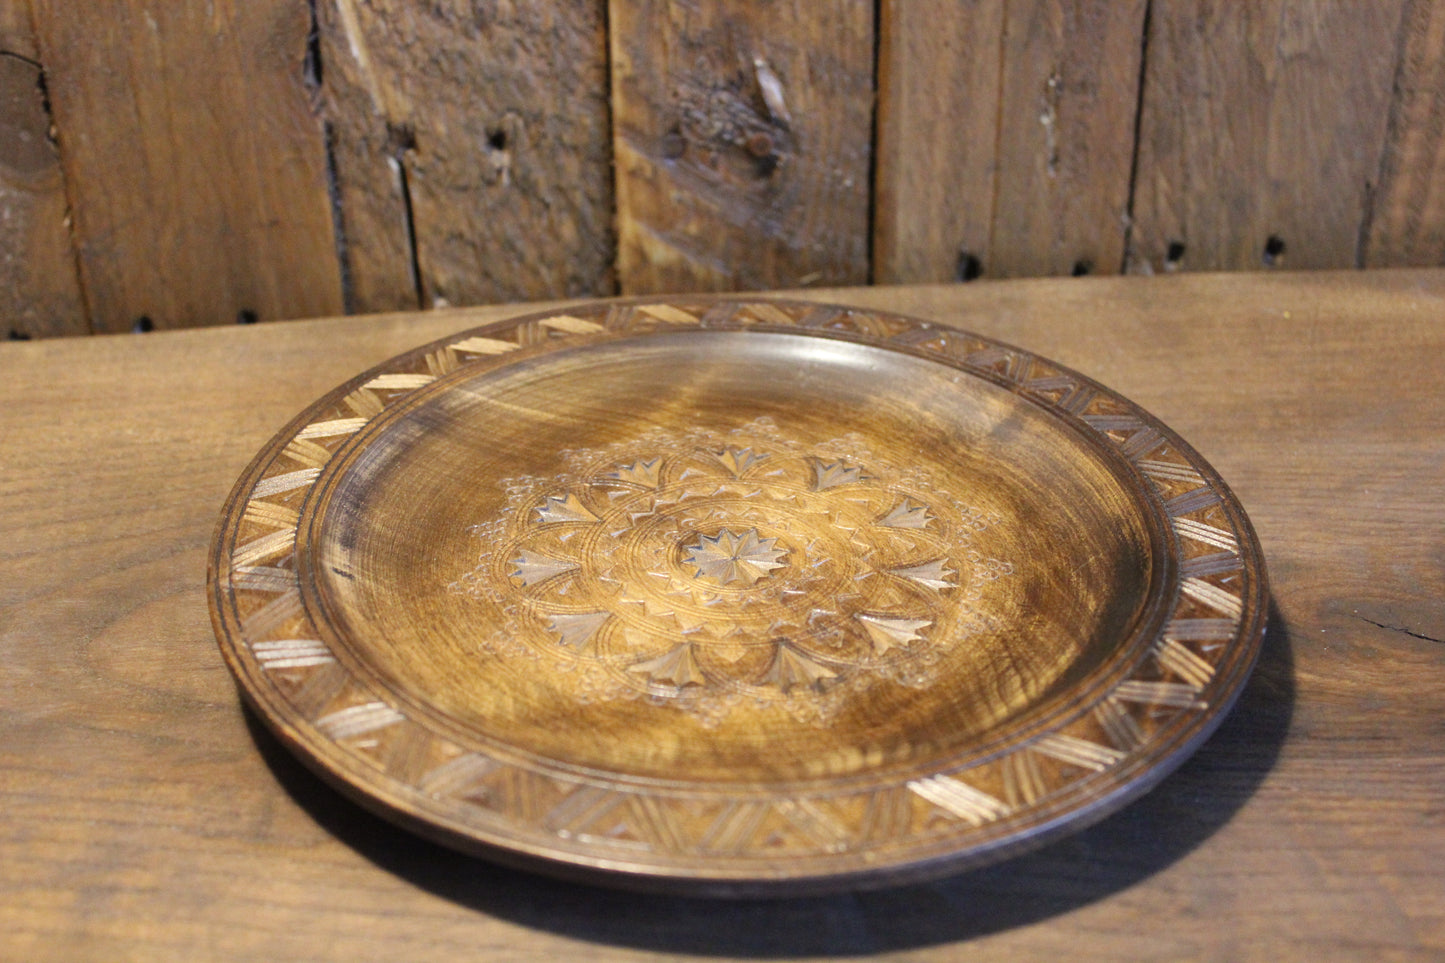 Decorative Wooden Plate